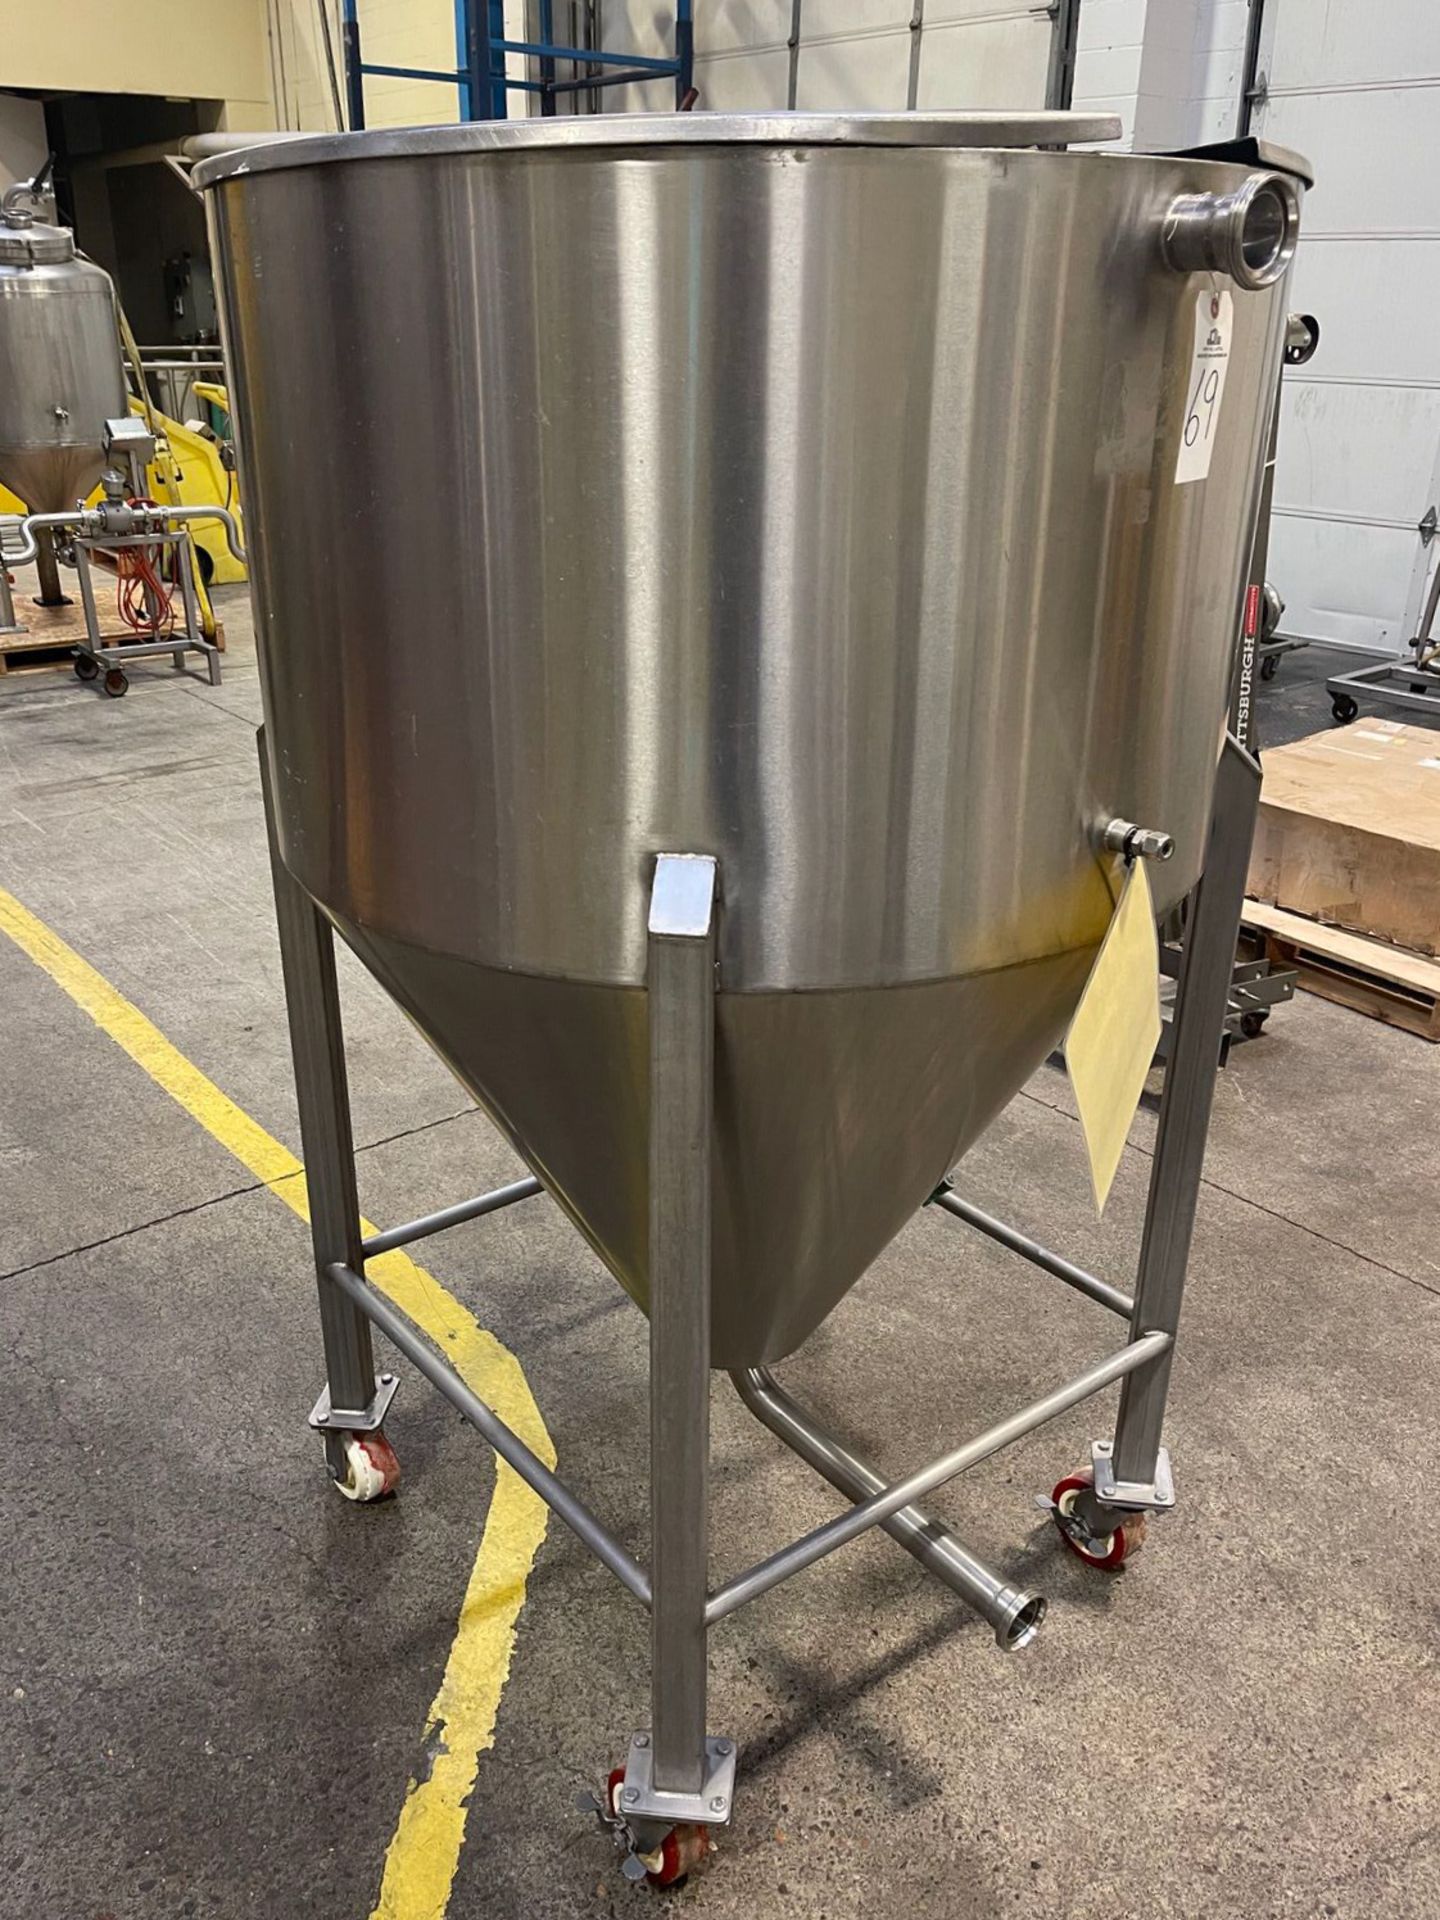 EST. 4 BBL UTILITY TANK ON CASTERS | Rig Fee: 150